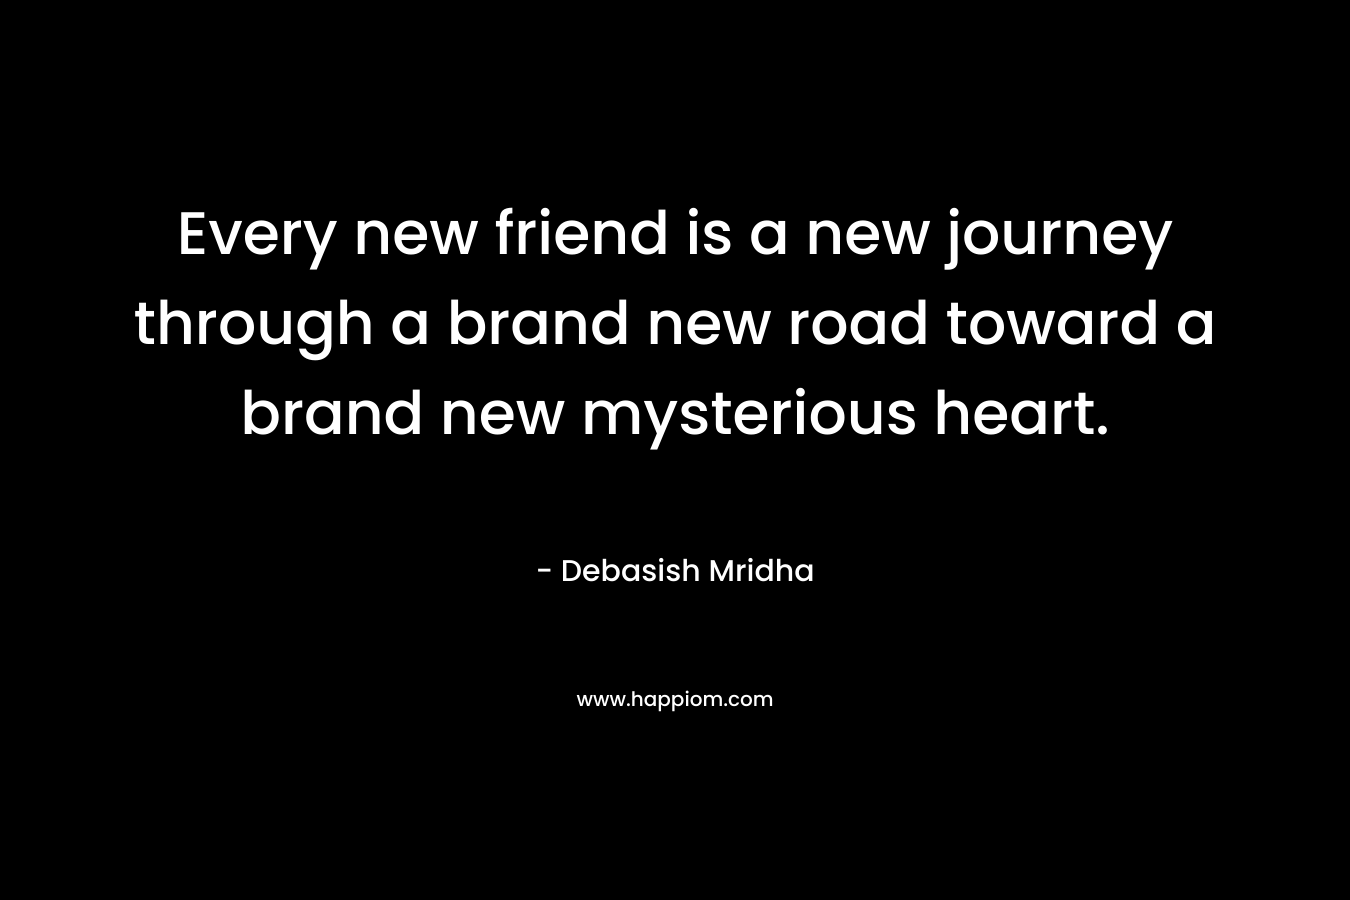 Every new friend is a new journey through a brand new road toward a brand new mysterious heart.